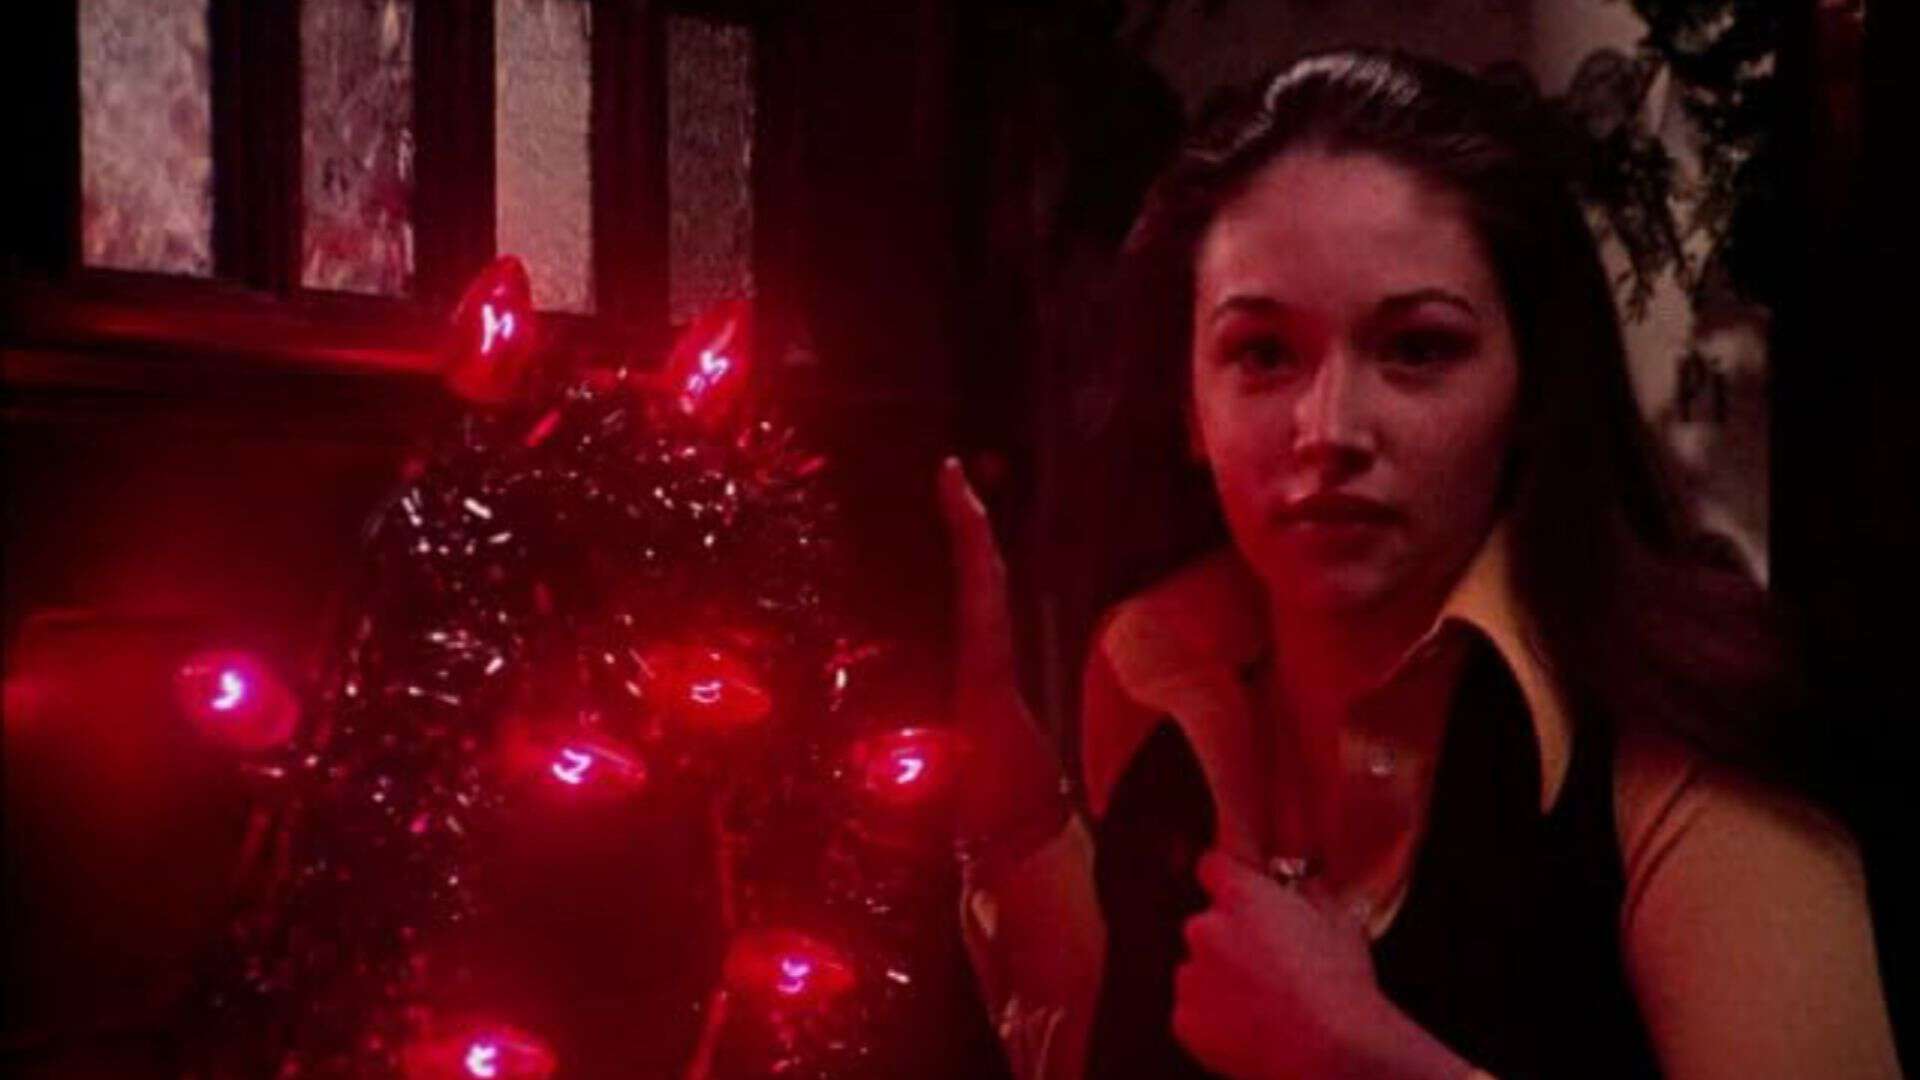  A young woman opens the front door with a wreath of red lights on it in this image from Film Funding Ltd.